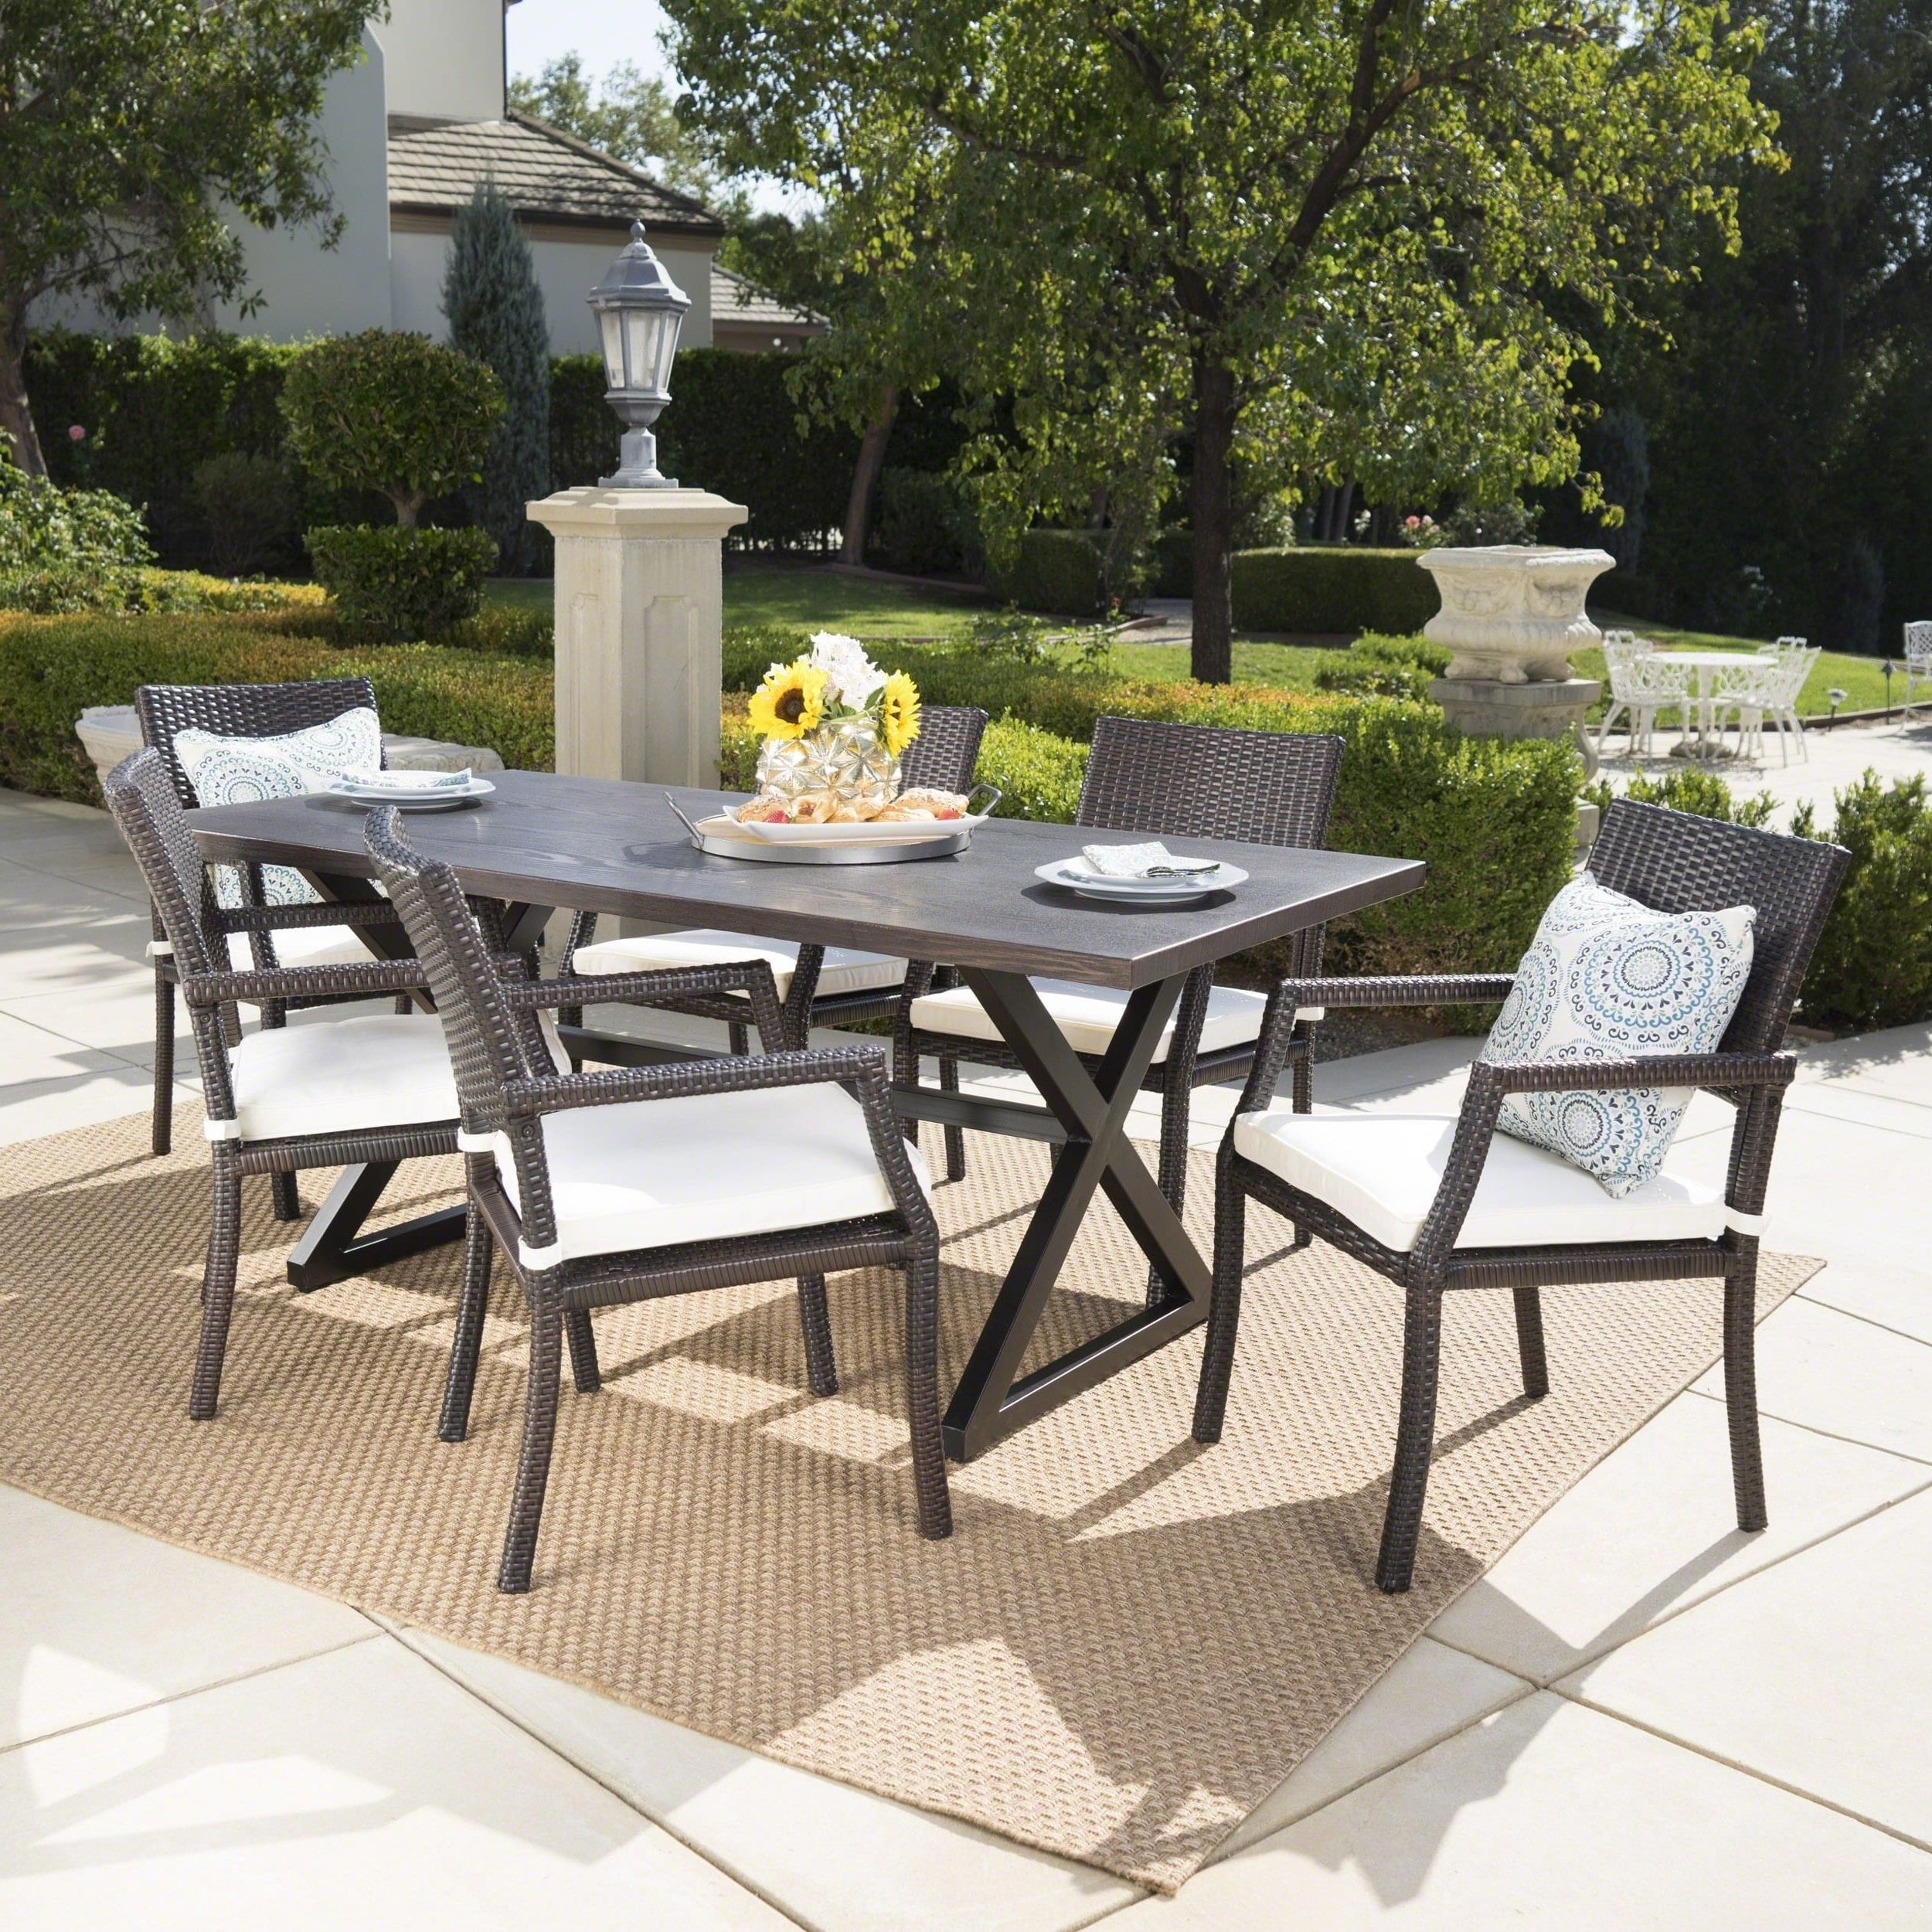 Trendy Brown Wicker Rectangular Patio Dining Sets Throughout Alani Outdoor 7 Piece Rectangular Wicker Aluminum Dining Set Brown N/a (View 1 of 15)